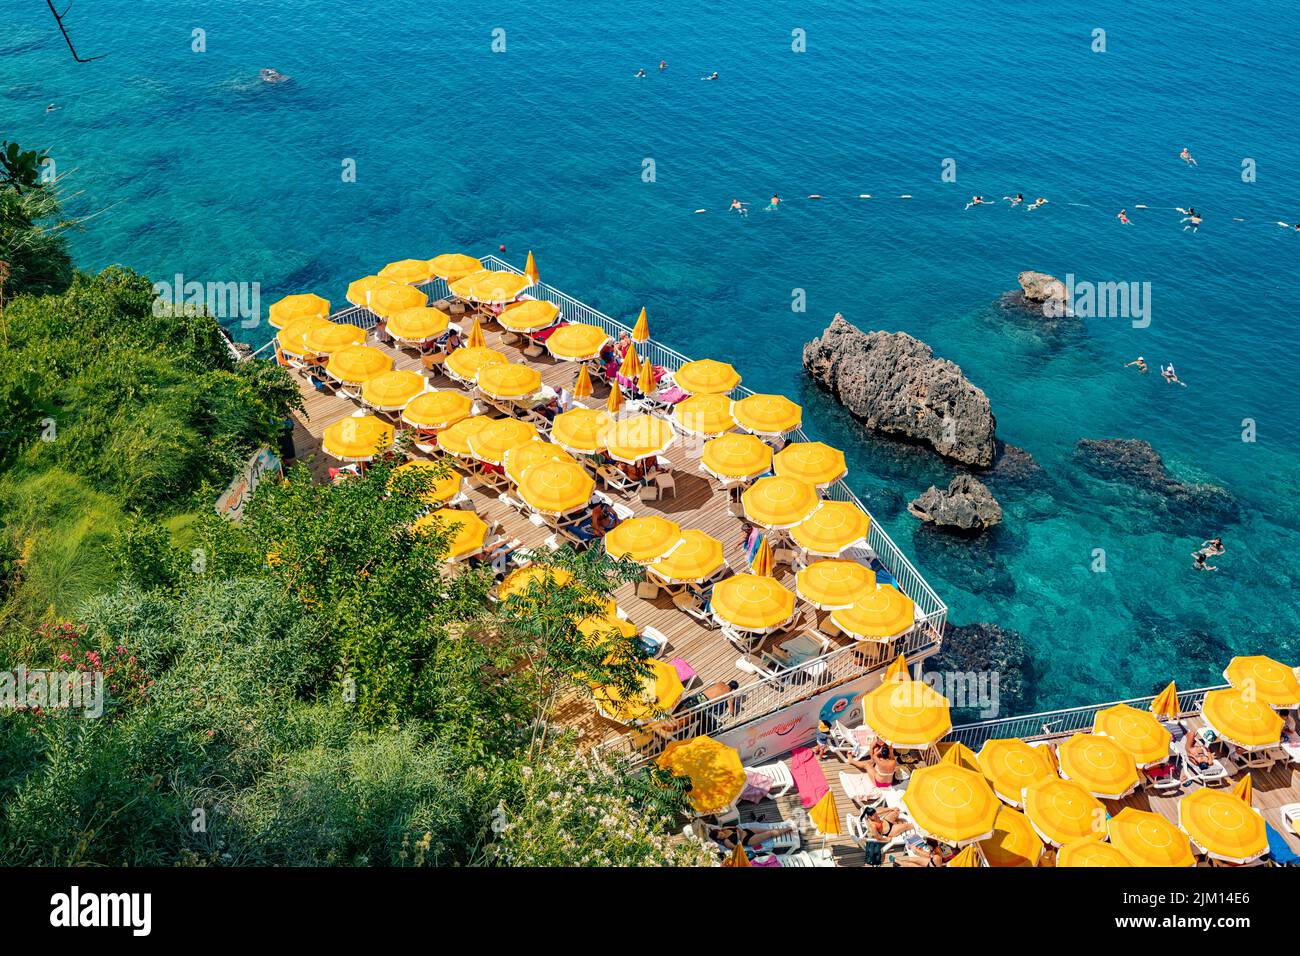 23 June 2022, Antalya, Turkey: Hidden narrow and cozy beach among cliffs and rocks with bright yellow umbrellas and sunbeds and scenic refreshing blue Stock Photo